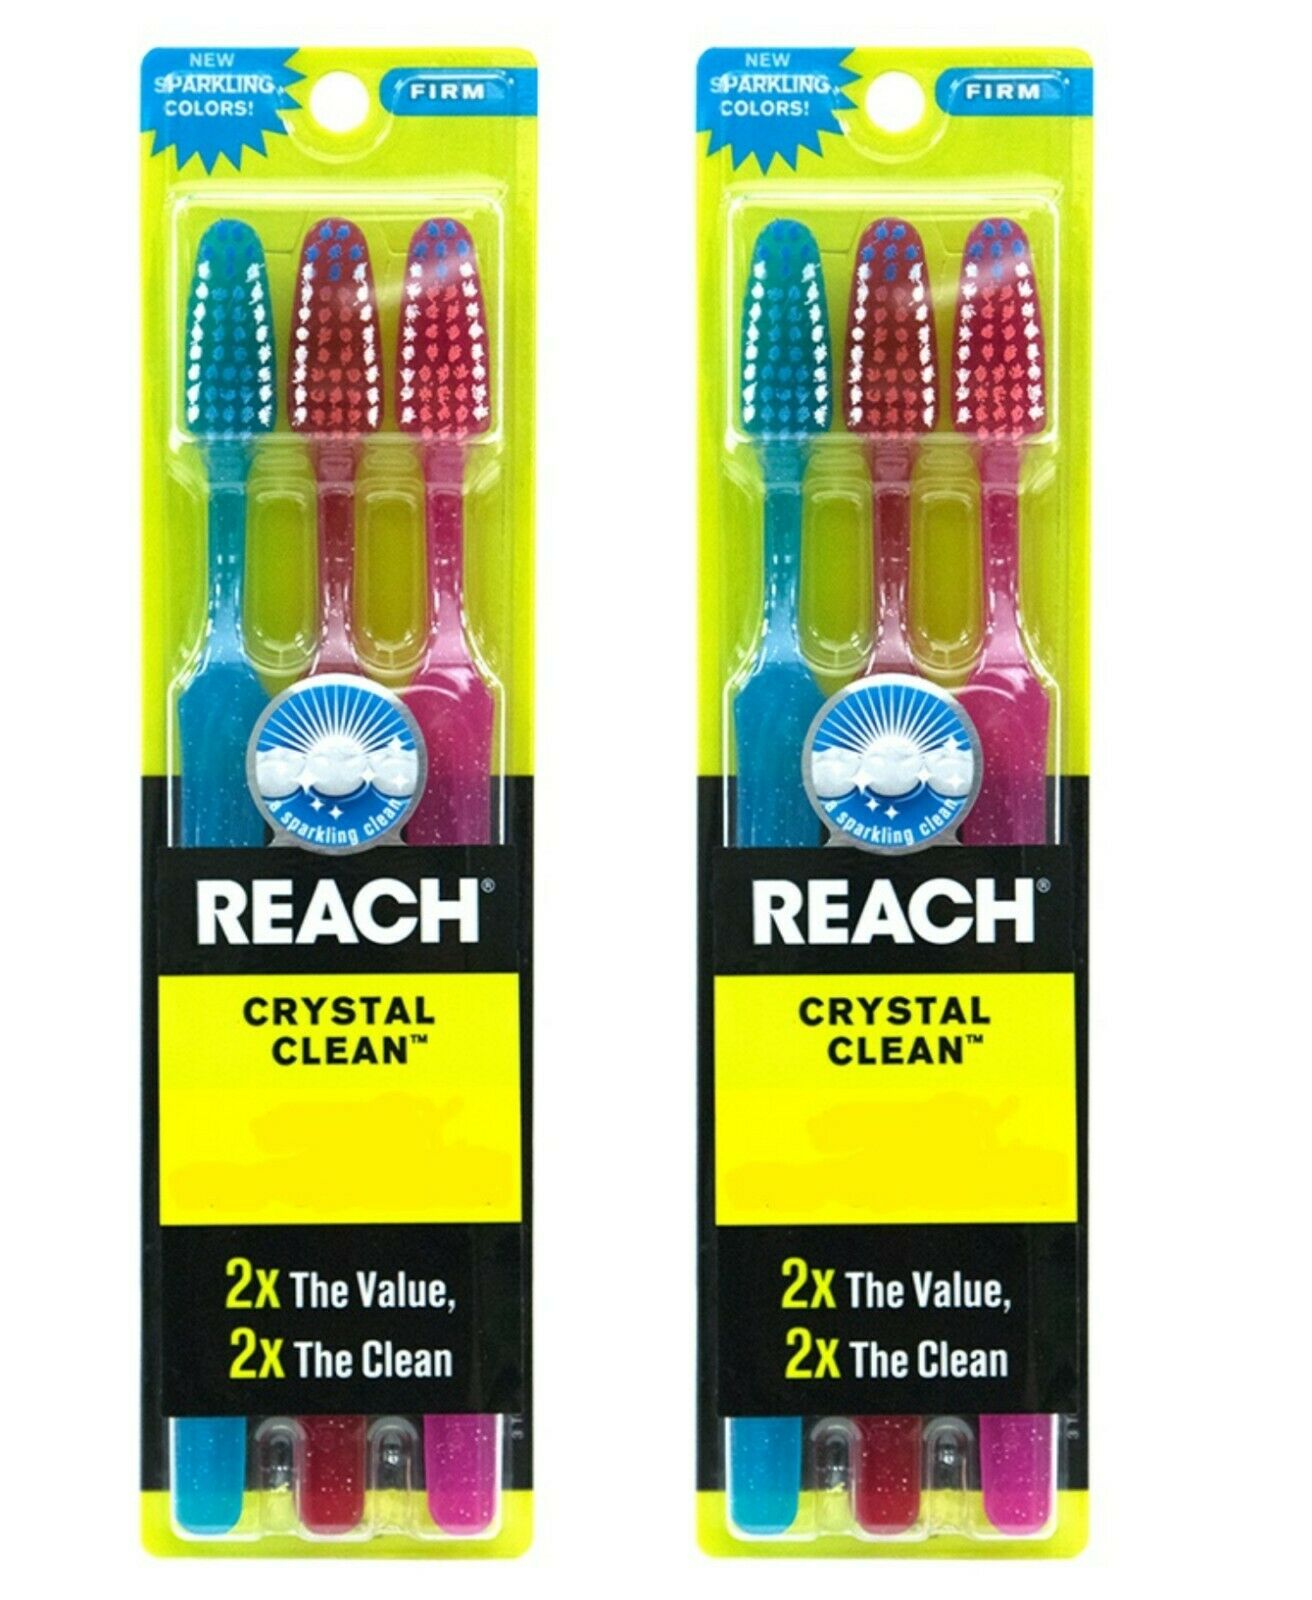 6 Reach Toothbrush Extra Clean Firm Bristles Hard - Free Shipping Usa Seller